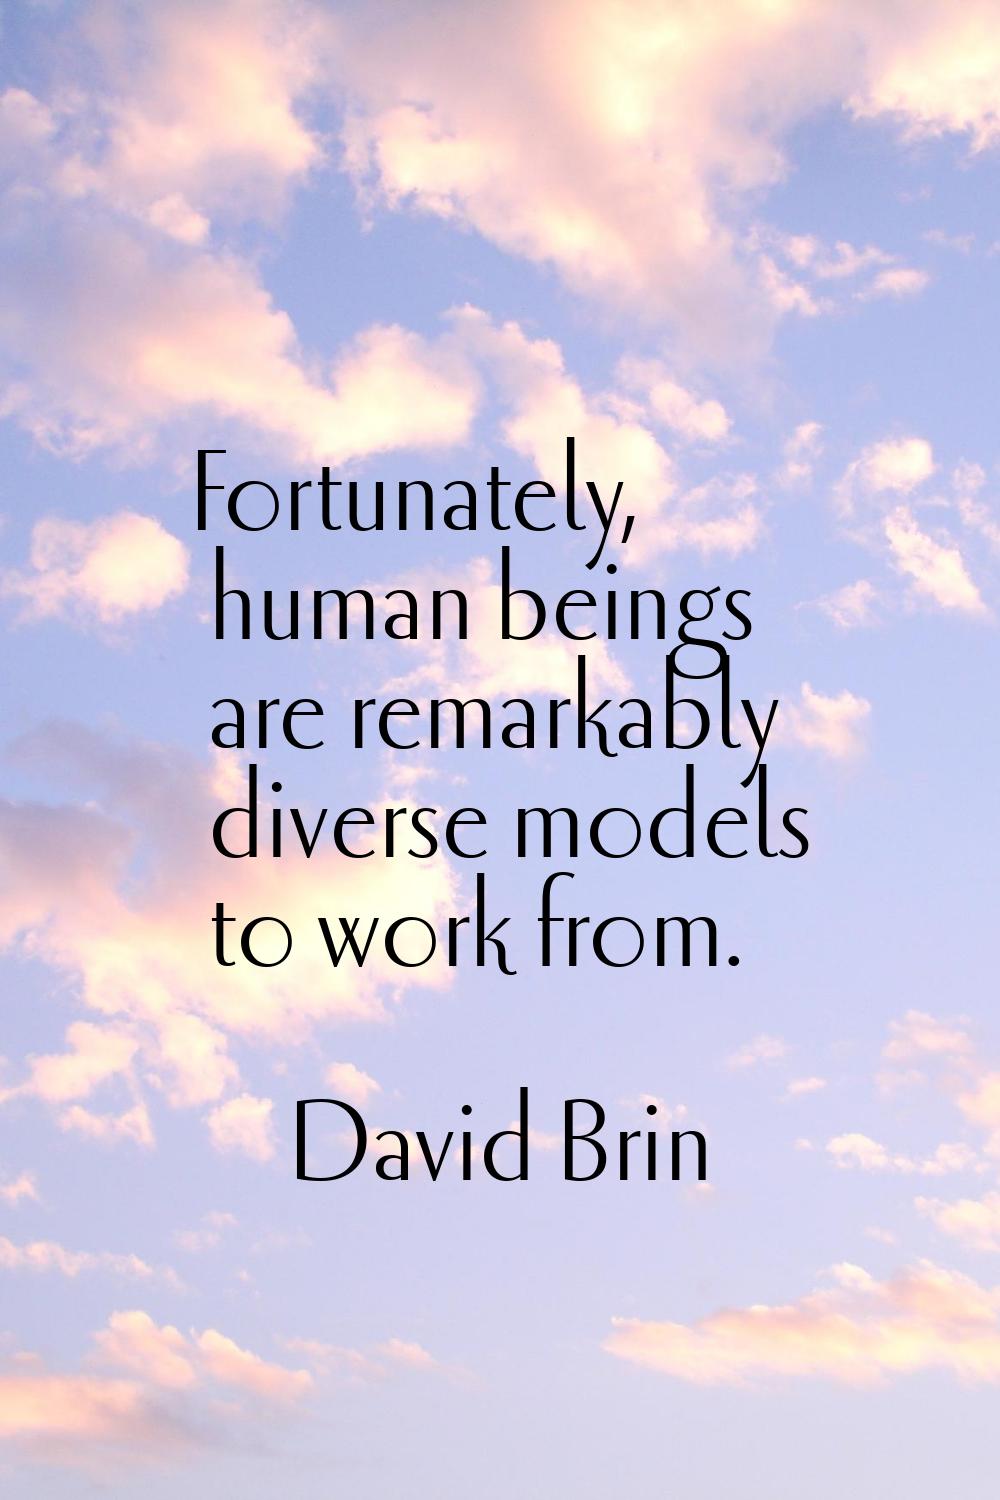 Fortunately, human beings are remarkably diverse models to work from.